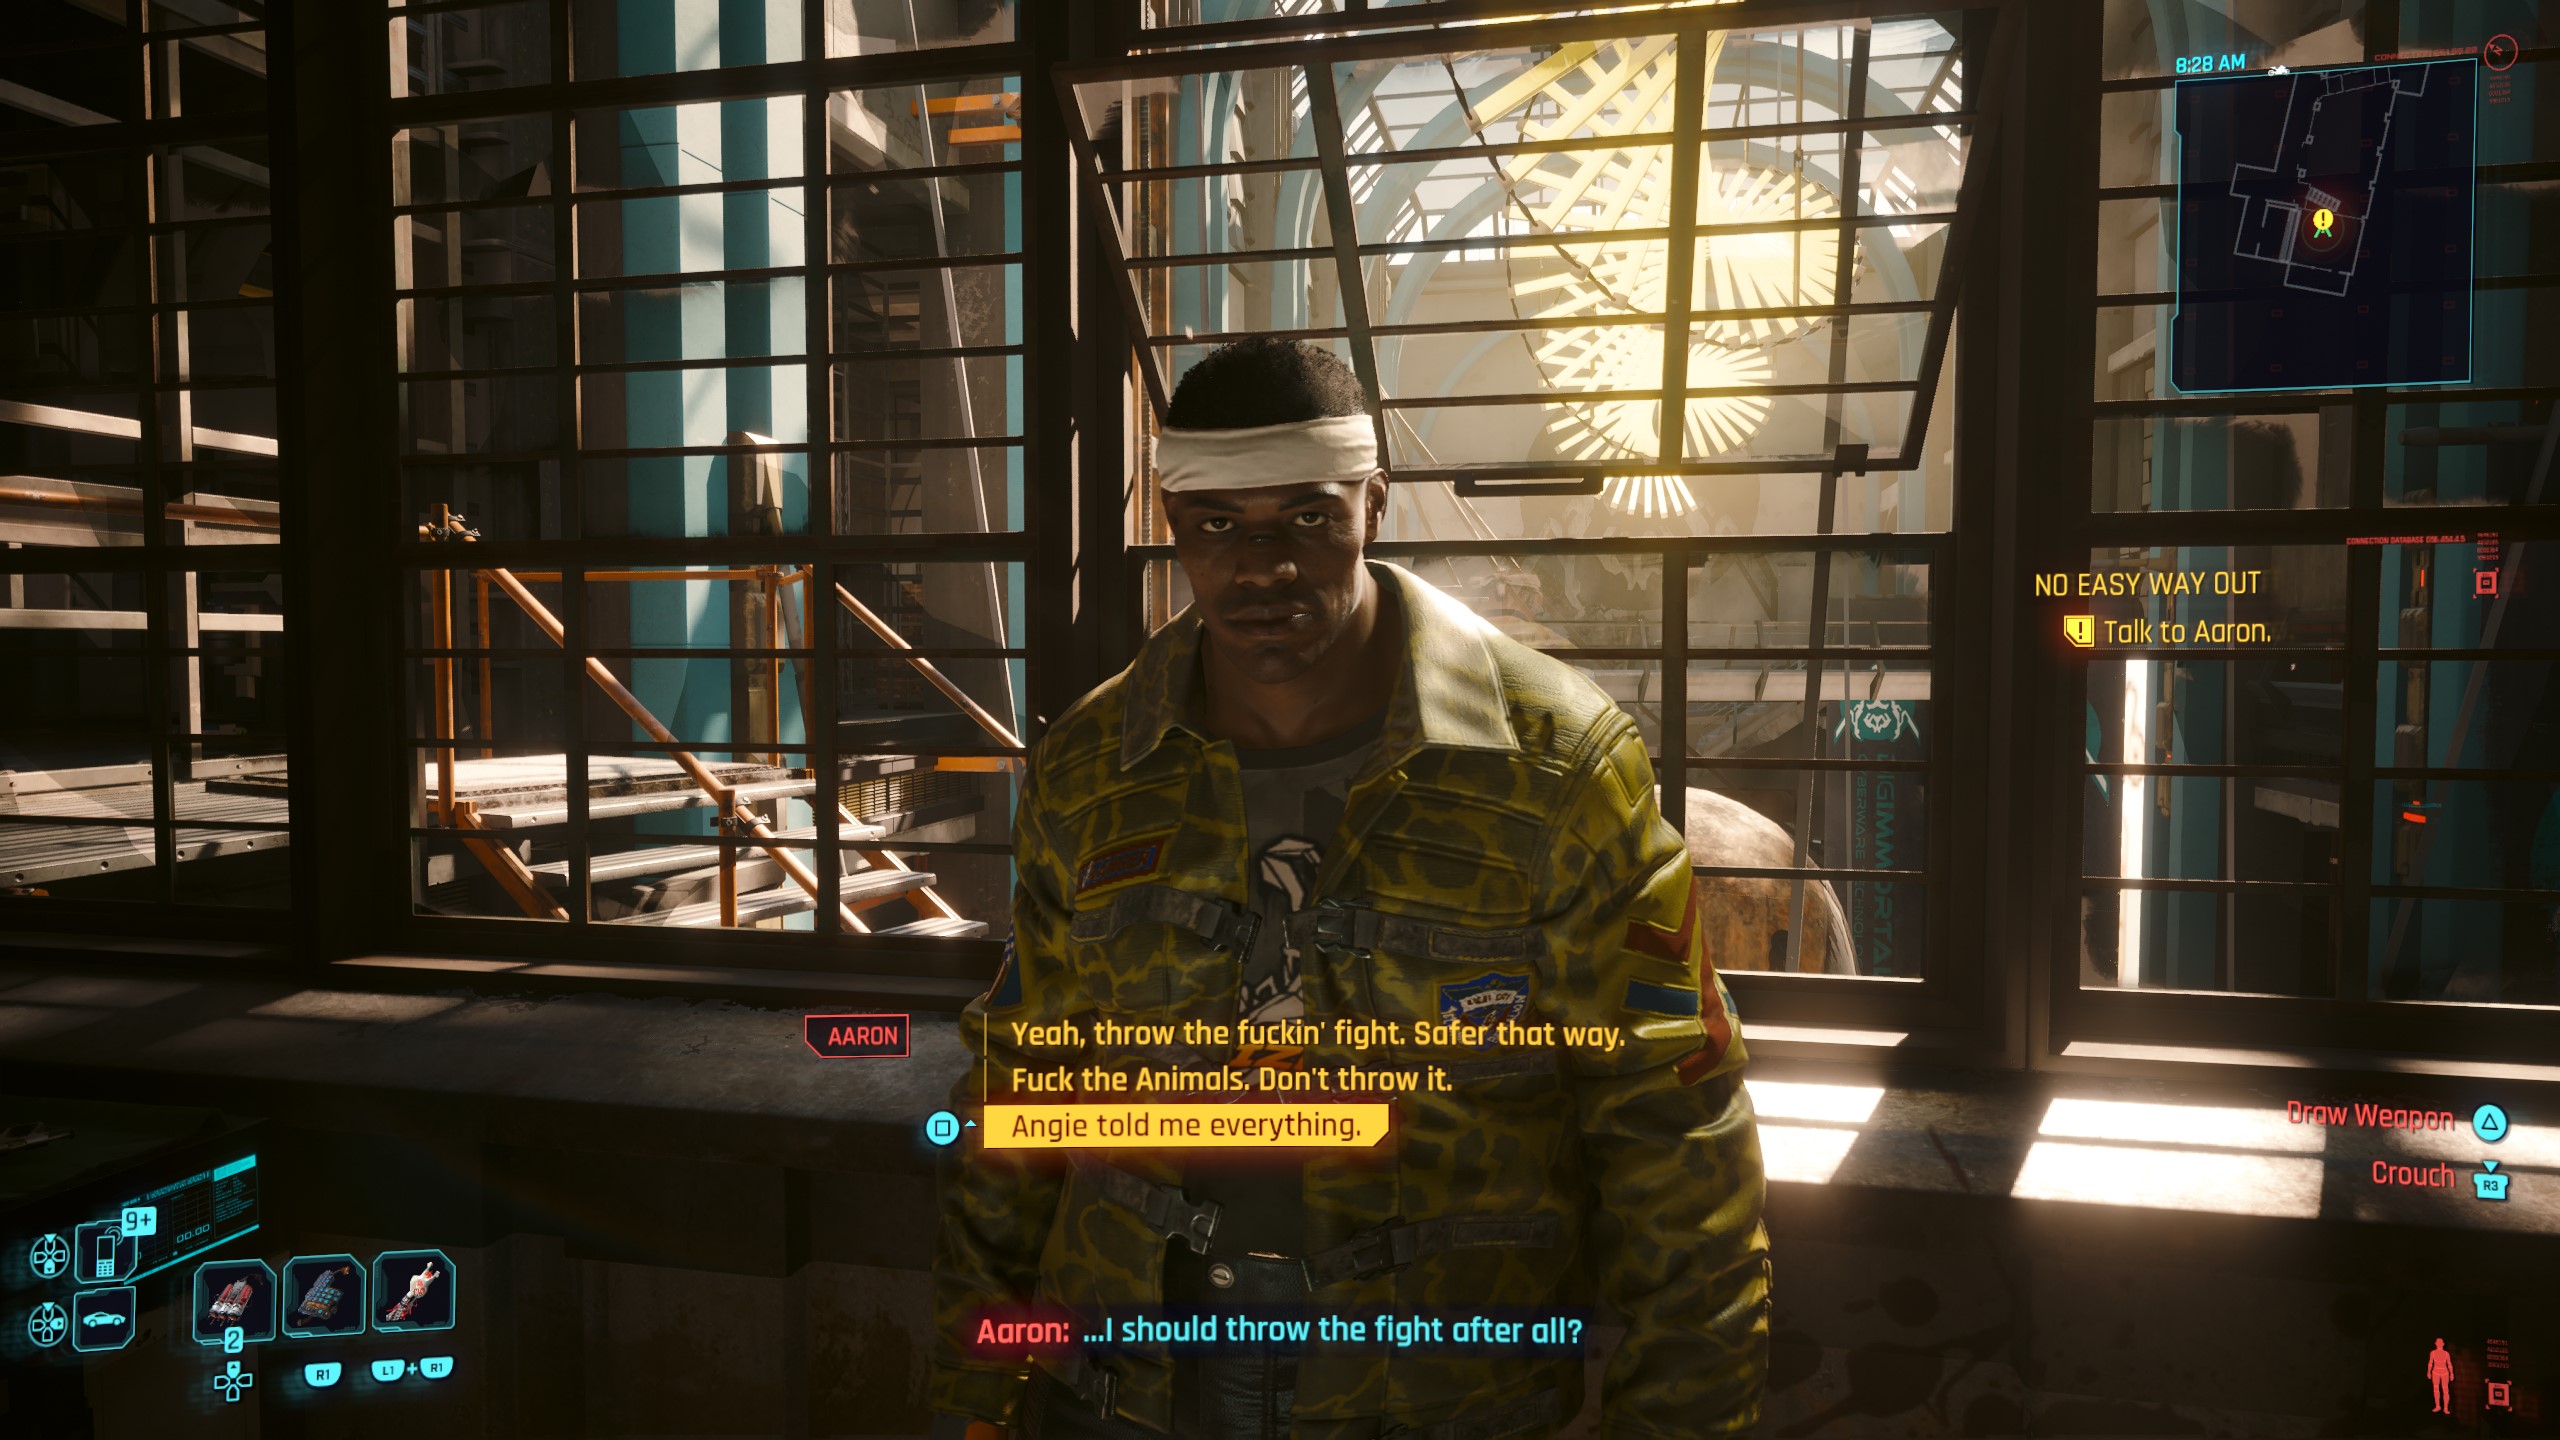 Cyberpunk 2077 No Easy Way Out - Telling Aaron what to do